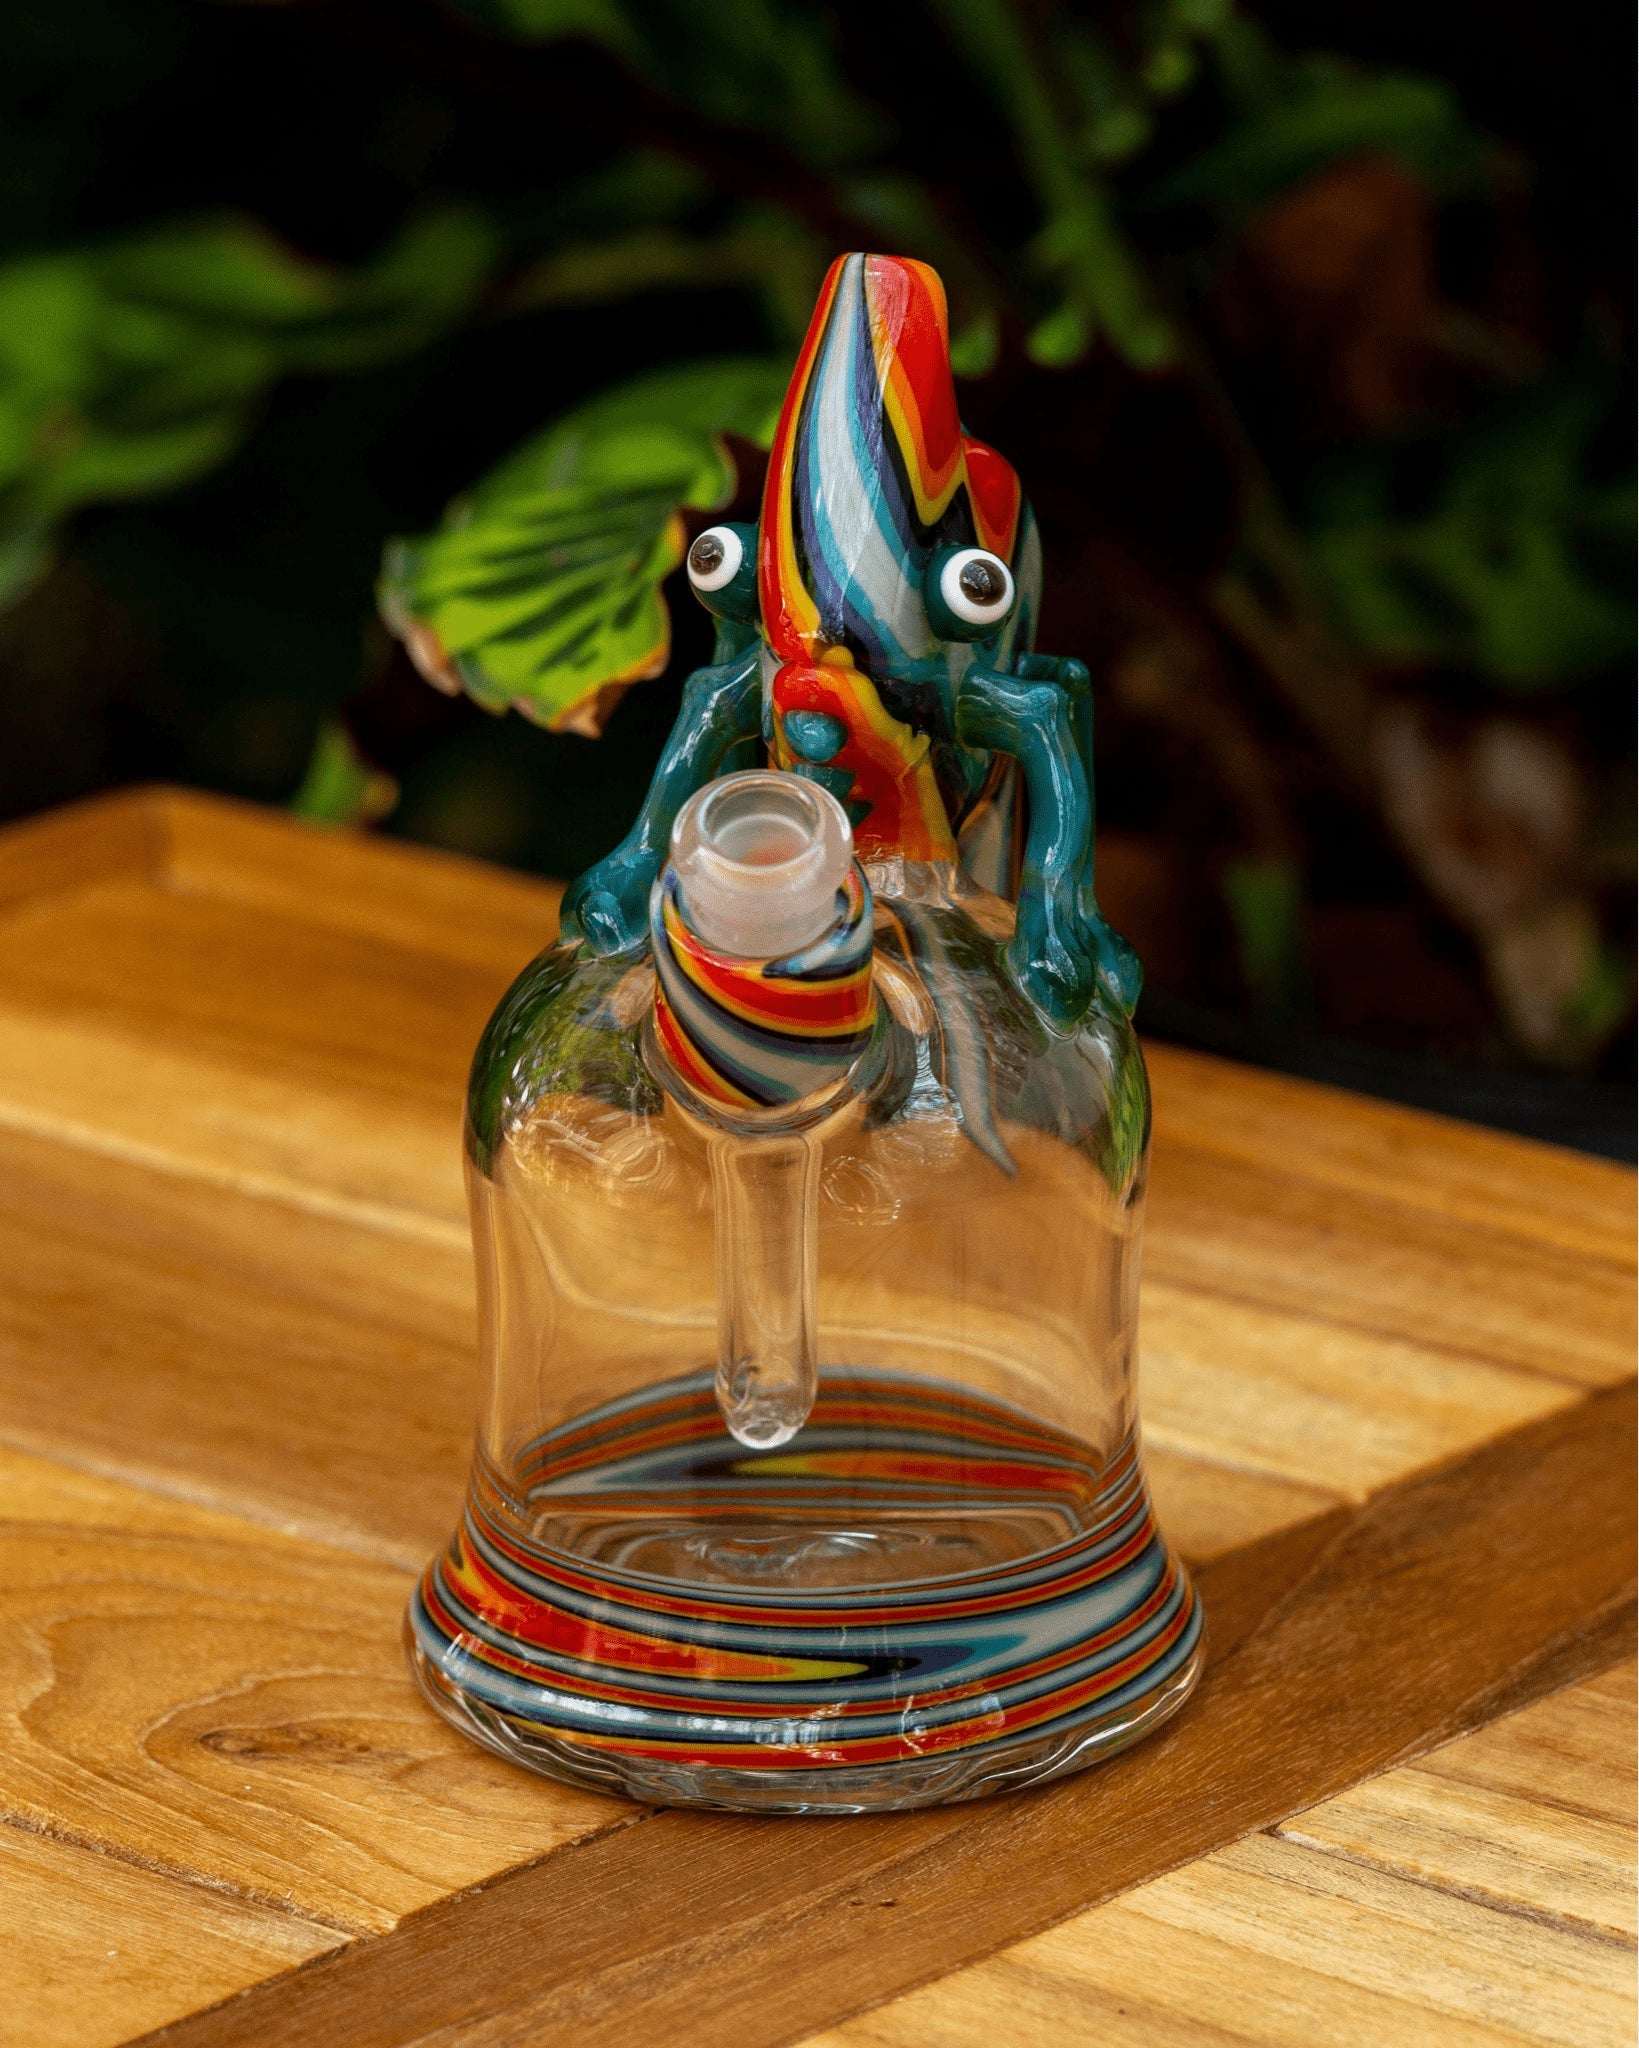 artisan-crafted design of the Red/Orange/Yellow/Purple/Blue/White Chameleon Wig Wag Rig by Willy That Glass Guy